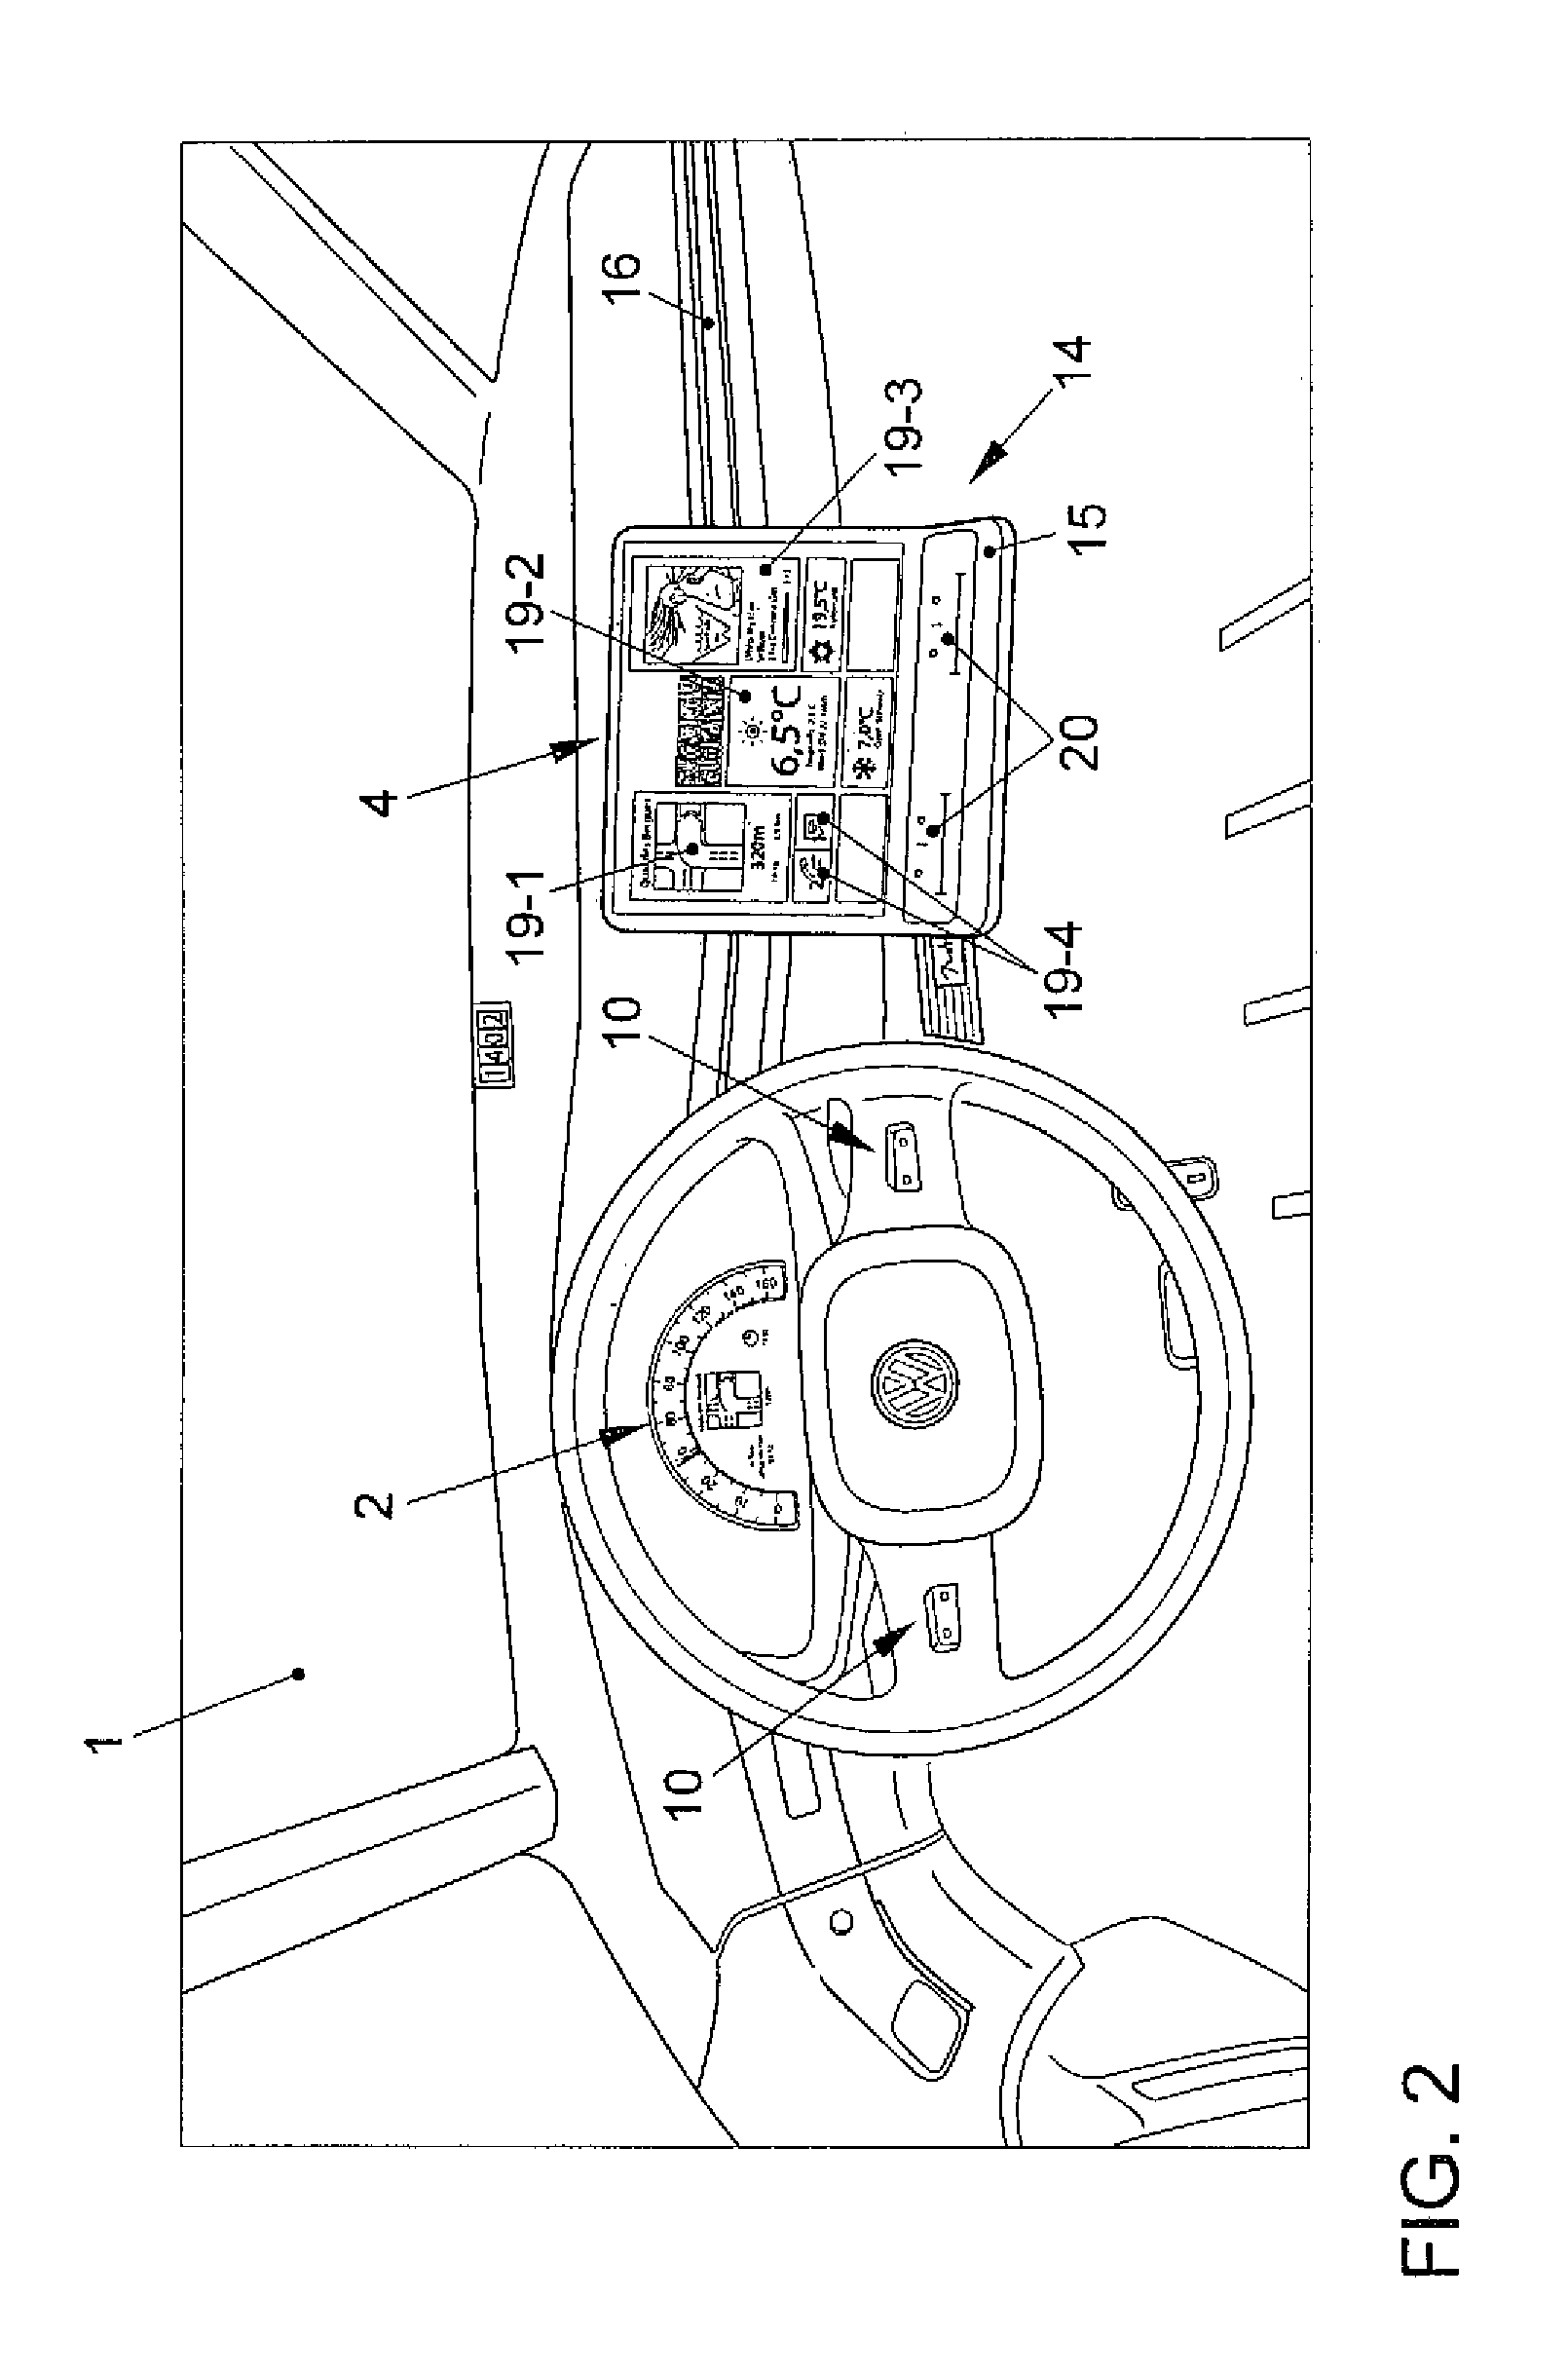 Operating Device in a Vehicle